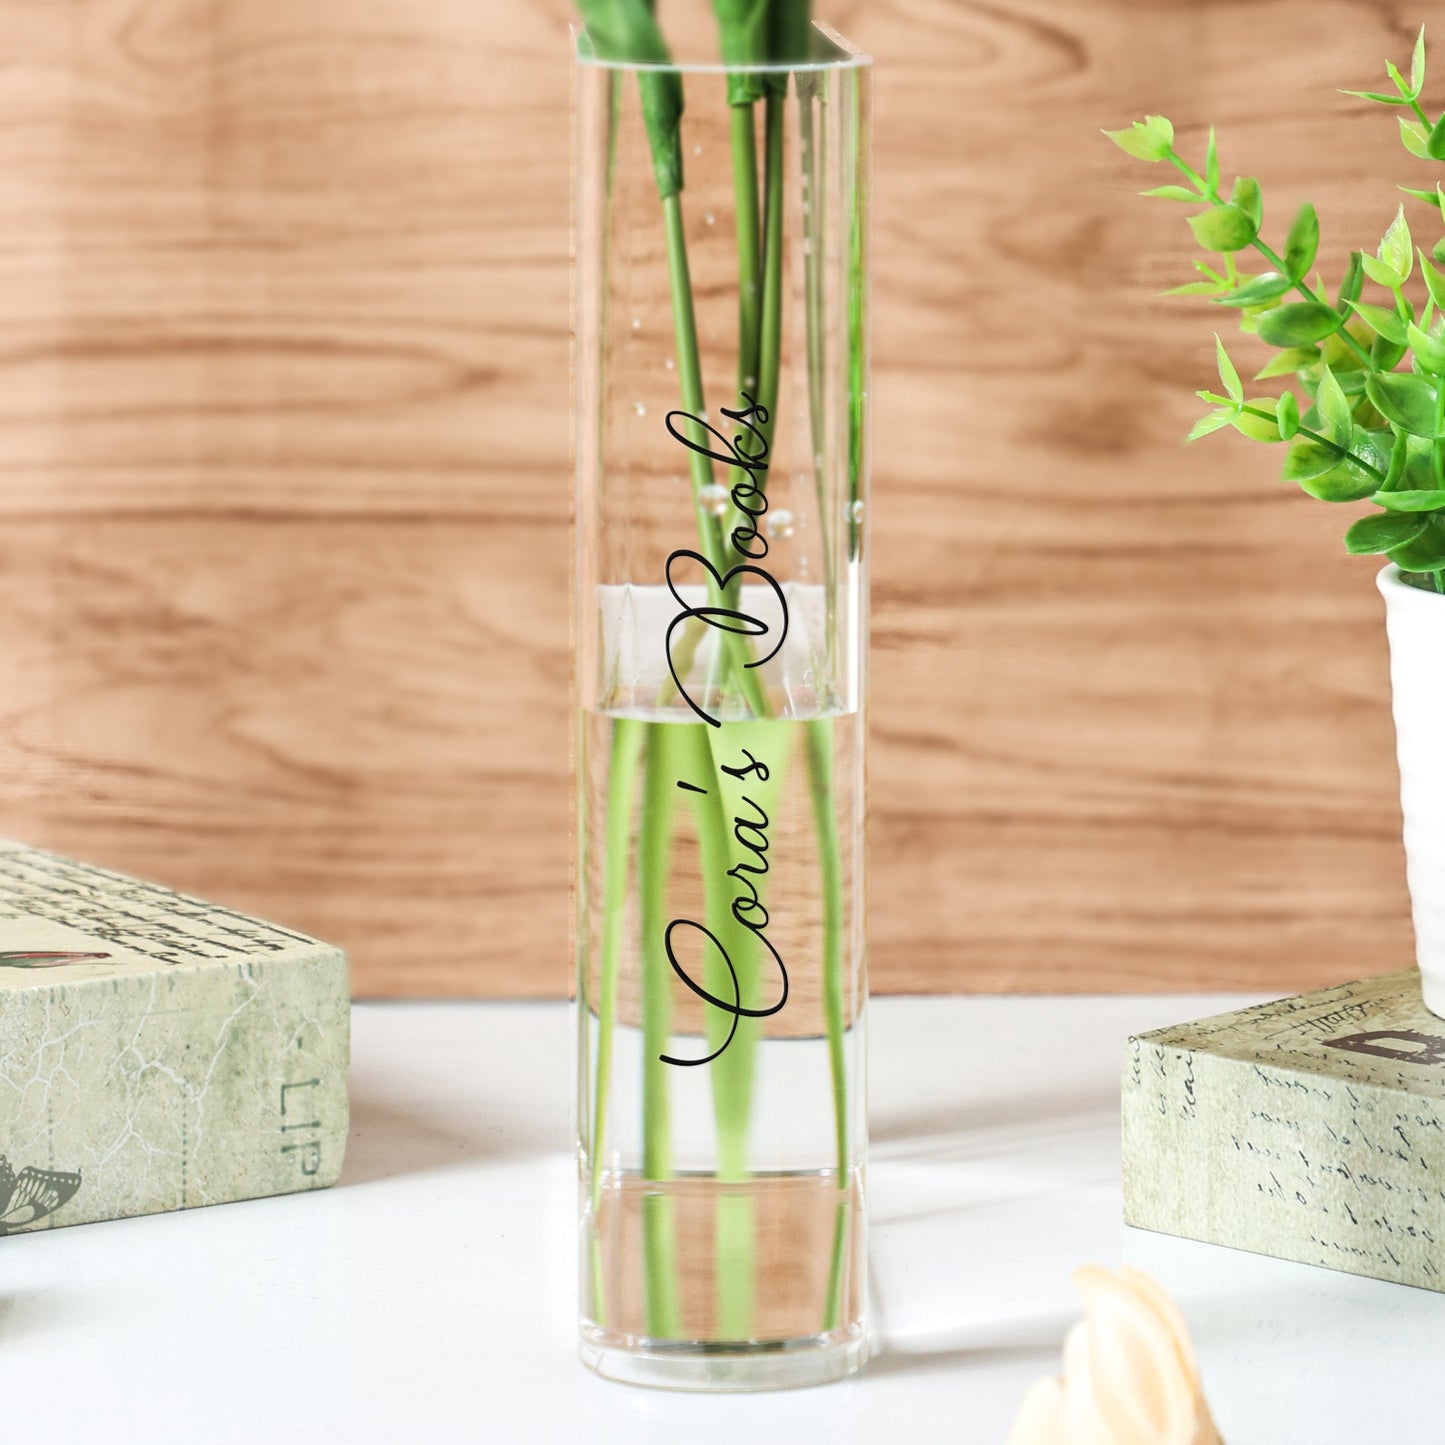 Custom Name Just One More Chapter - Personalized Acrylic Book Vase